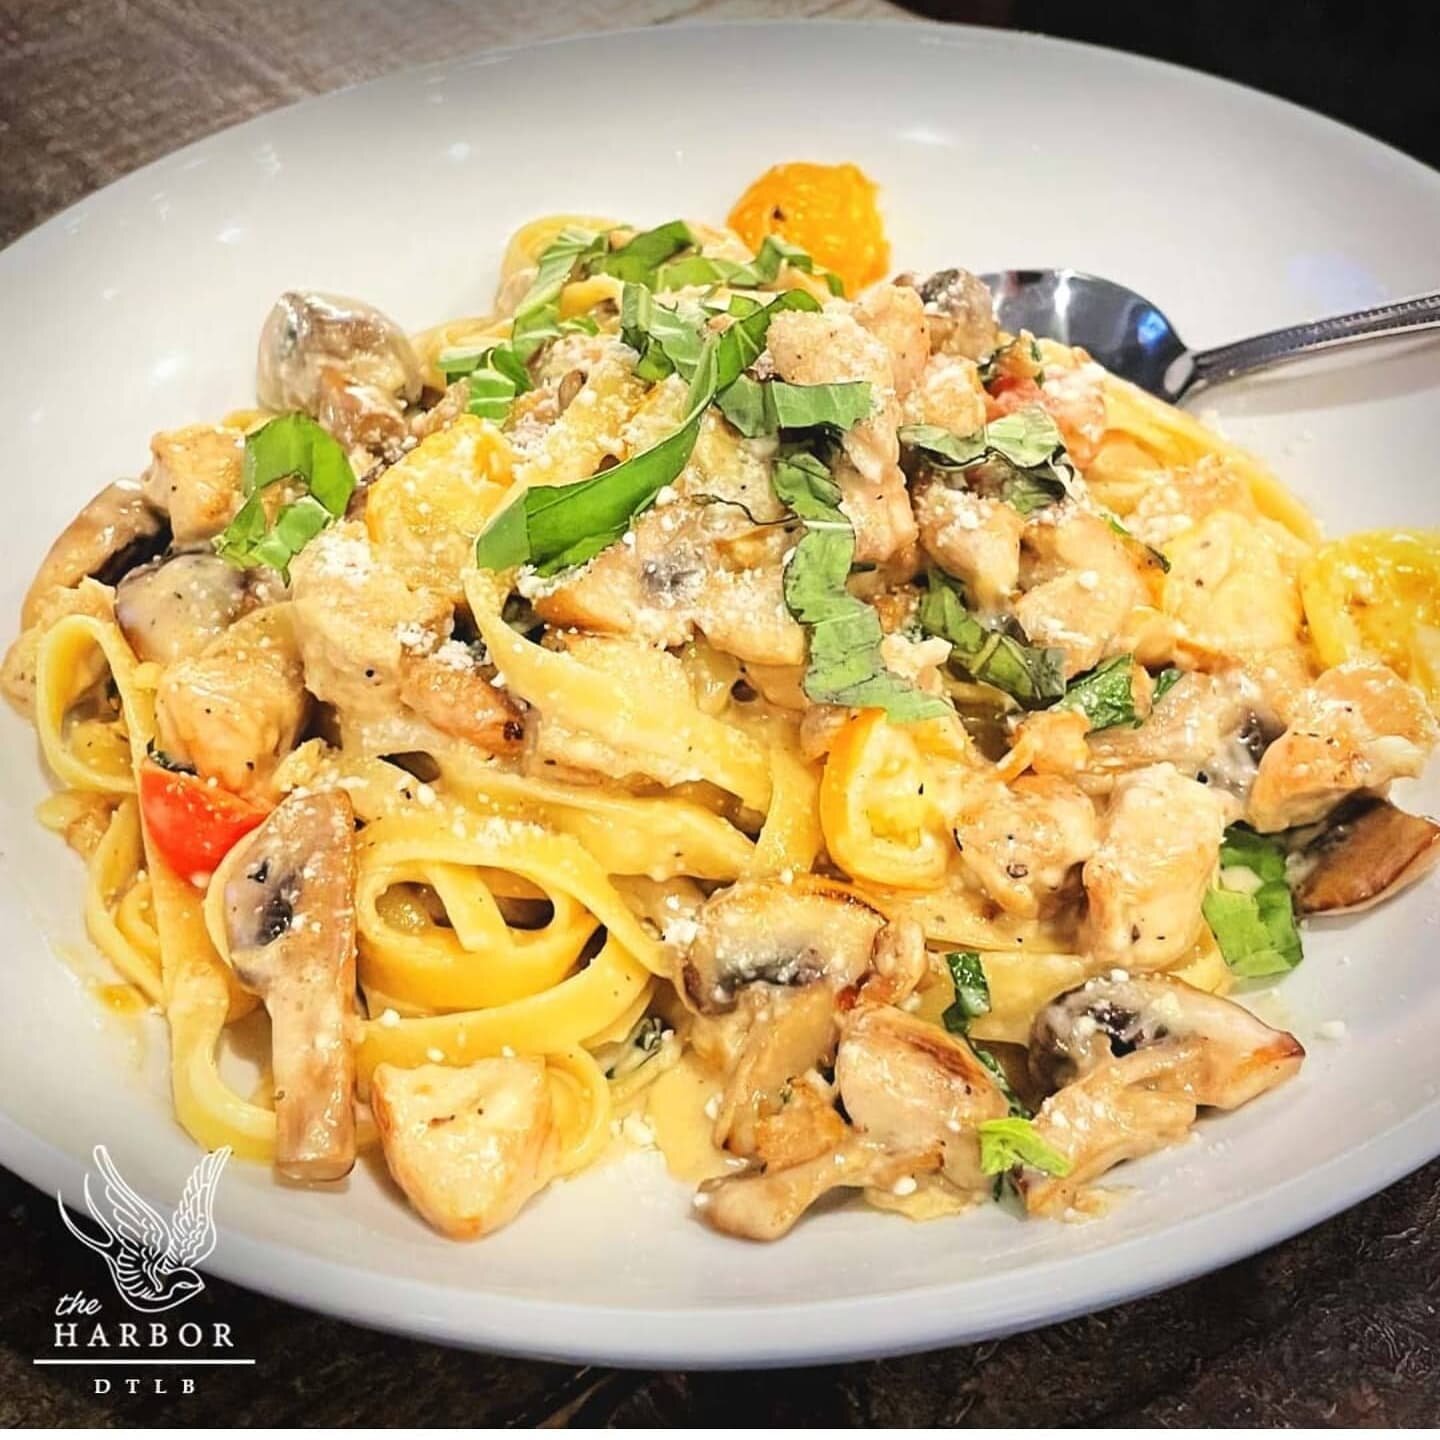 ⚠️Start your Friday Night off with one of our New Menu Items!! Come on down and try our new &quot;Garlic Chicken Fettuccine&quot; off our New Favorites Menu! Grilled Chicken with Mushrooms, Tomato, Garlic Cream Sauce, and Basil! #Nomnom | We Open at 